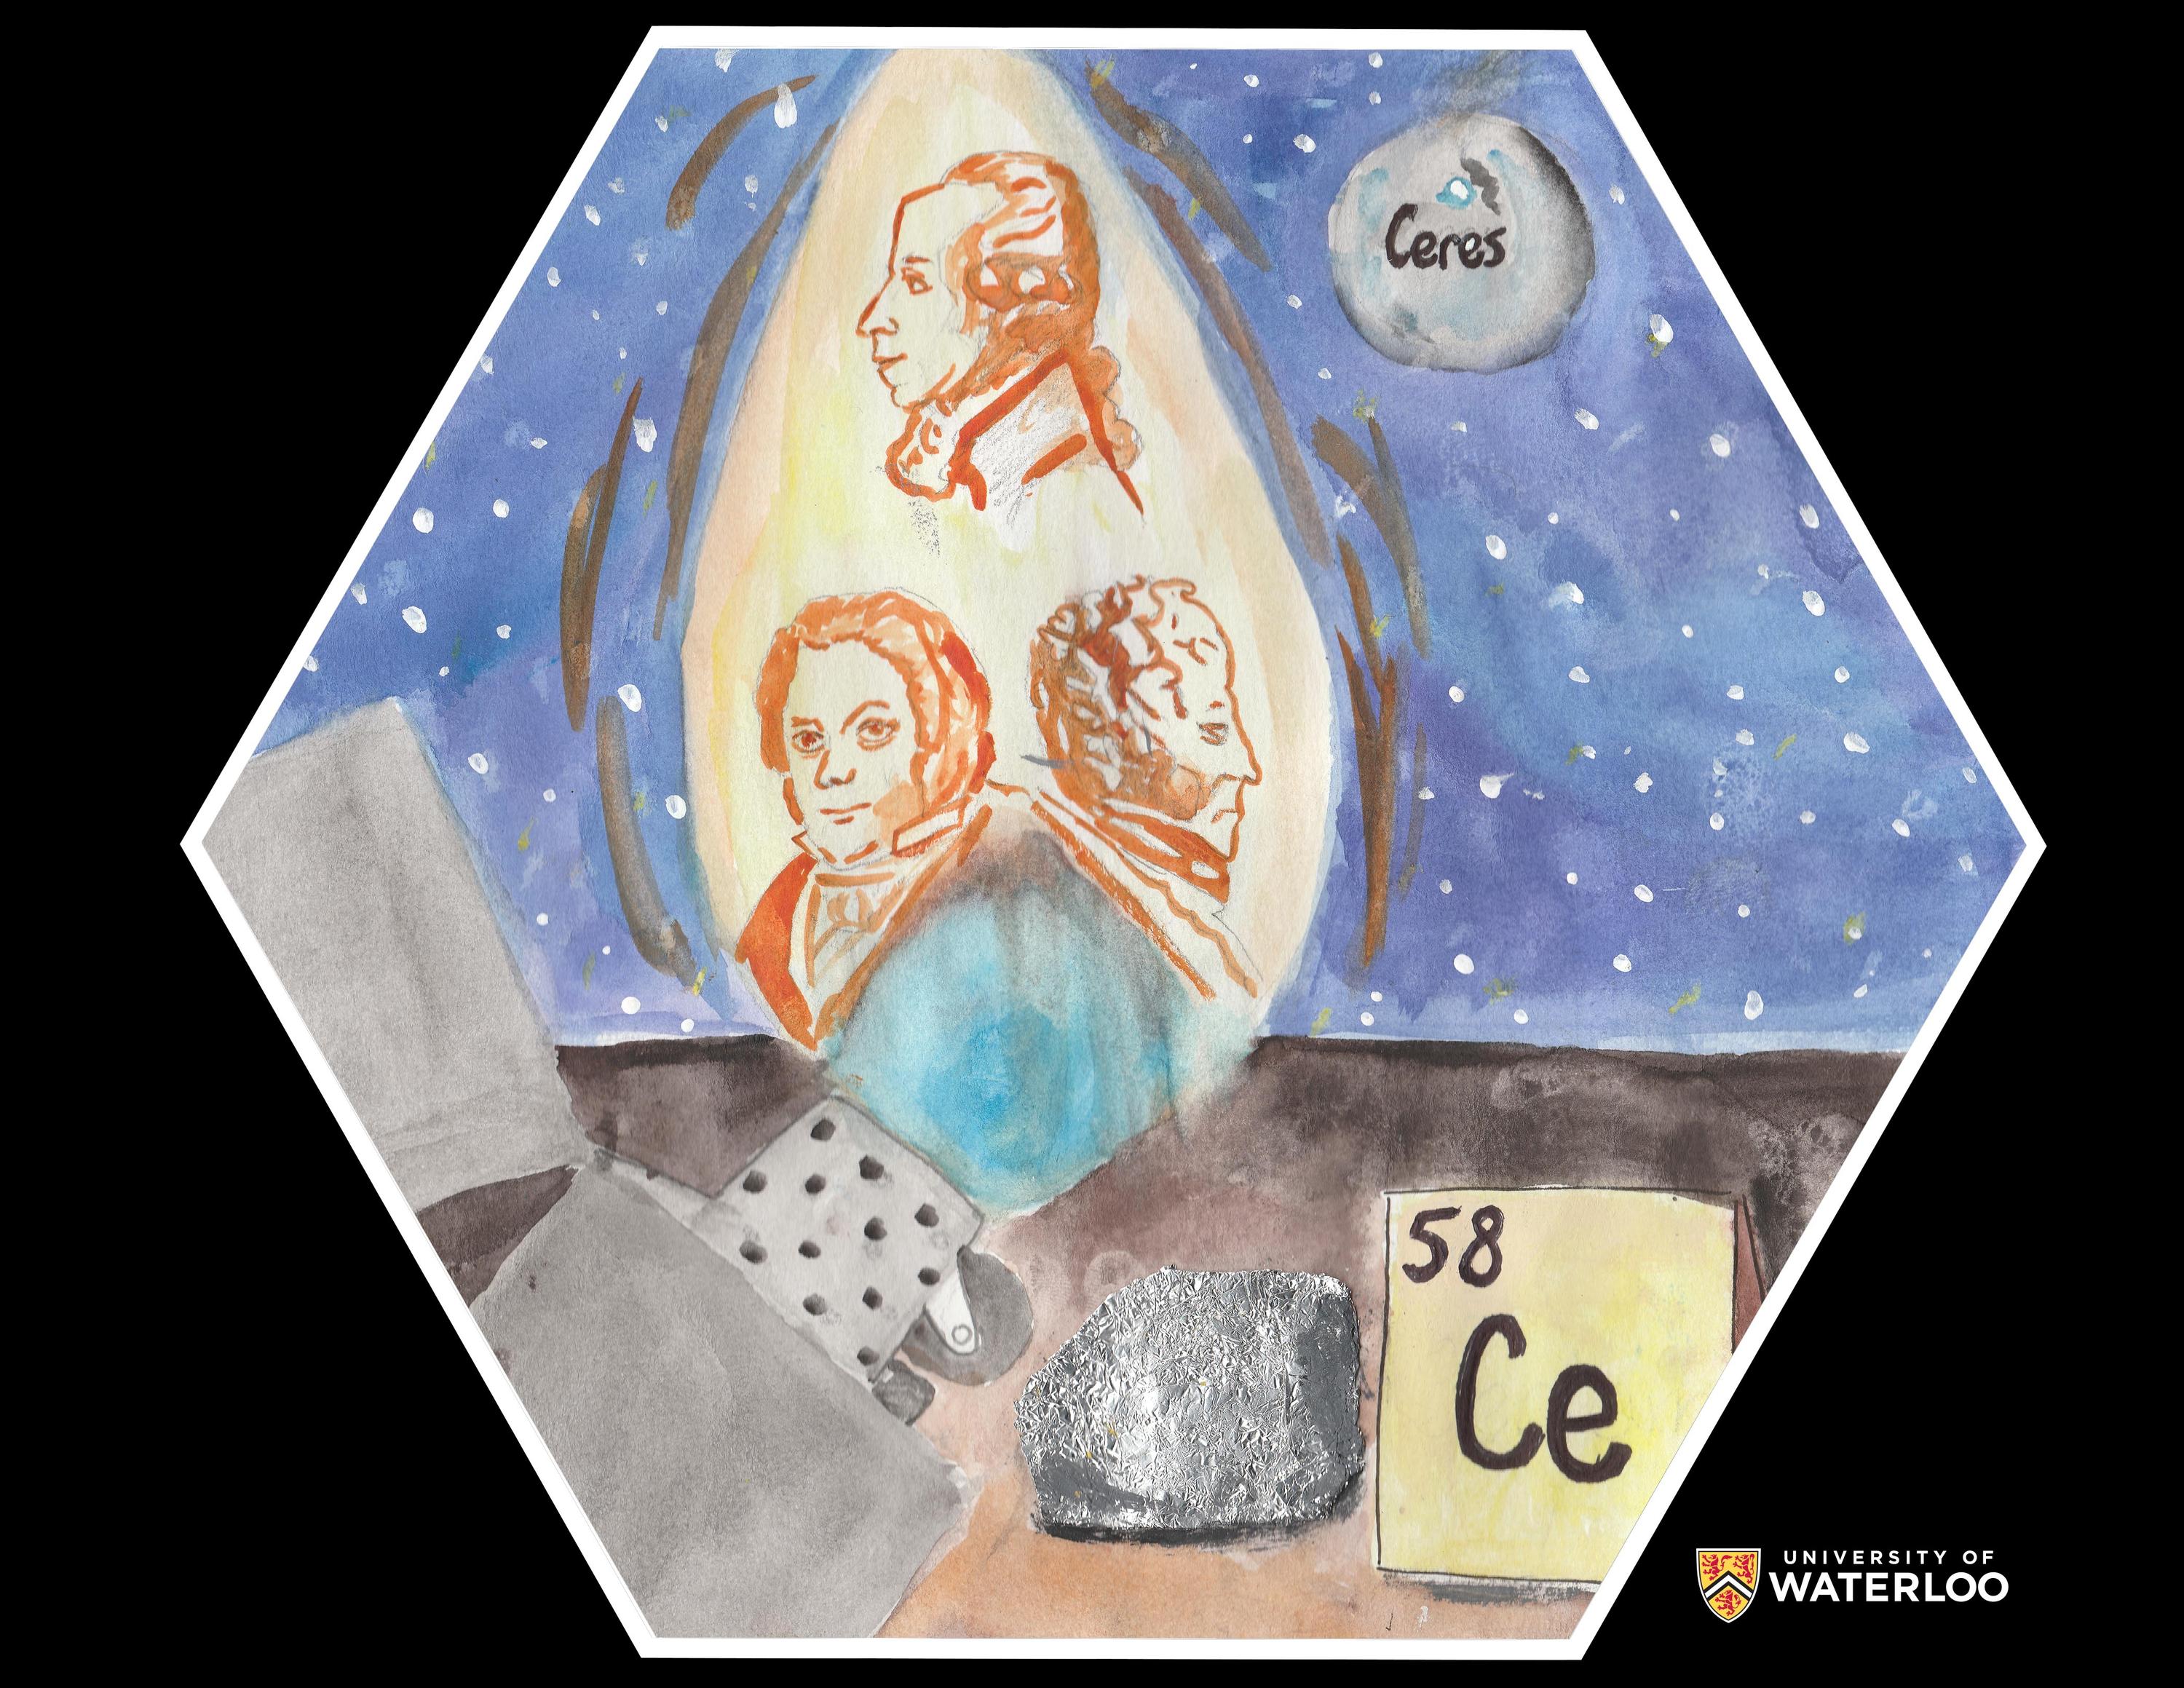  Martin Heinrich Klaproth (top), Jöns Jakob Berzelius and Wilhelm Hisinger (bottom) who discovered cerium within the flame of a lighter. Above the dwarf planet Ceres in the night sky is shown. Bottom shows the chemical symbol “Ce” and atomic number “58”. A piece of cerium metal appears on the ground.